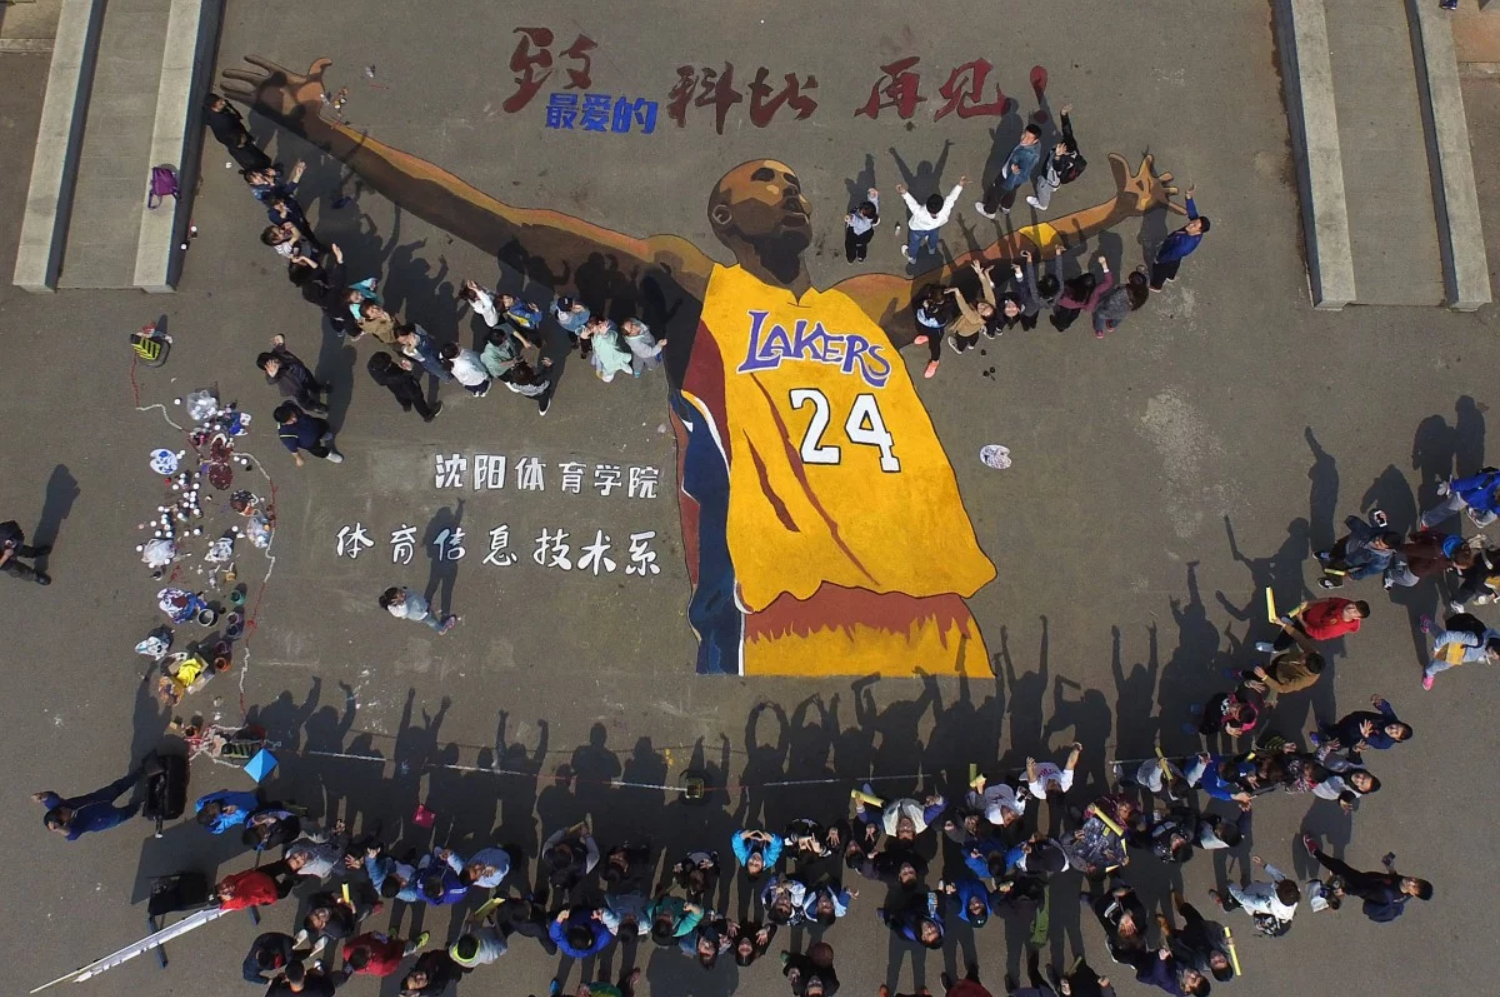 China says goodbye to basketball superstar Kobe Bryant, who died in a helicopter crash on Sunday. (Picture: Xinhua)